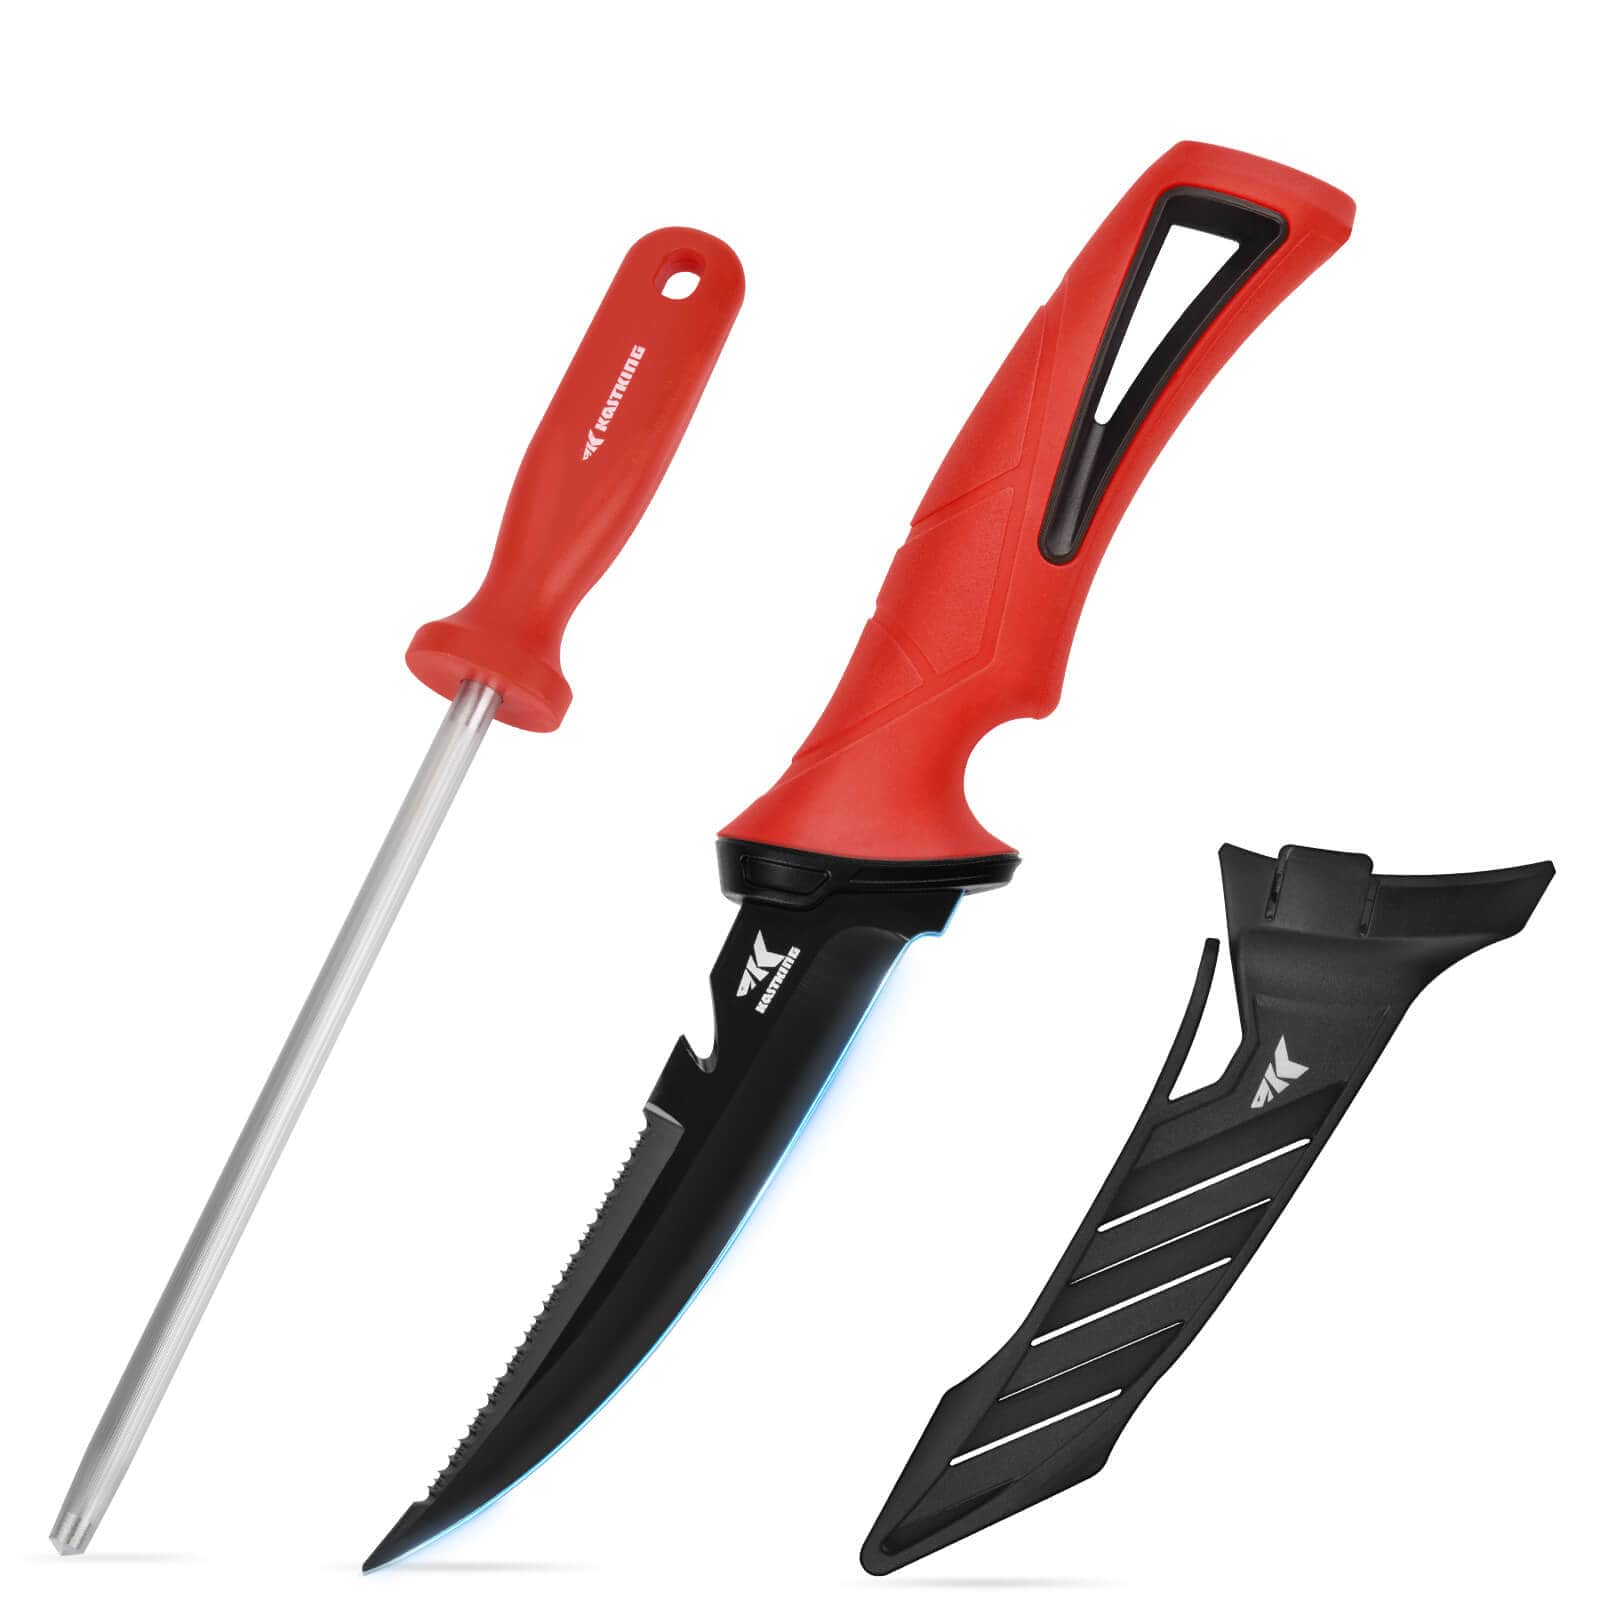 Search results for: 'bait knives